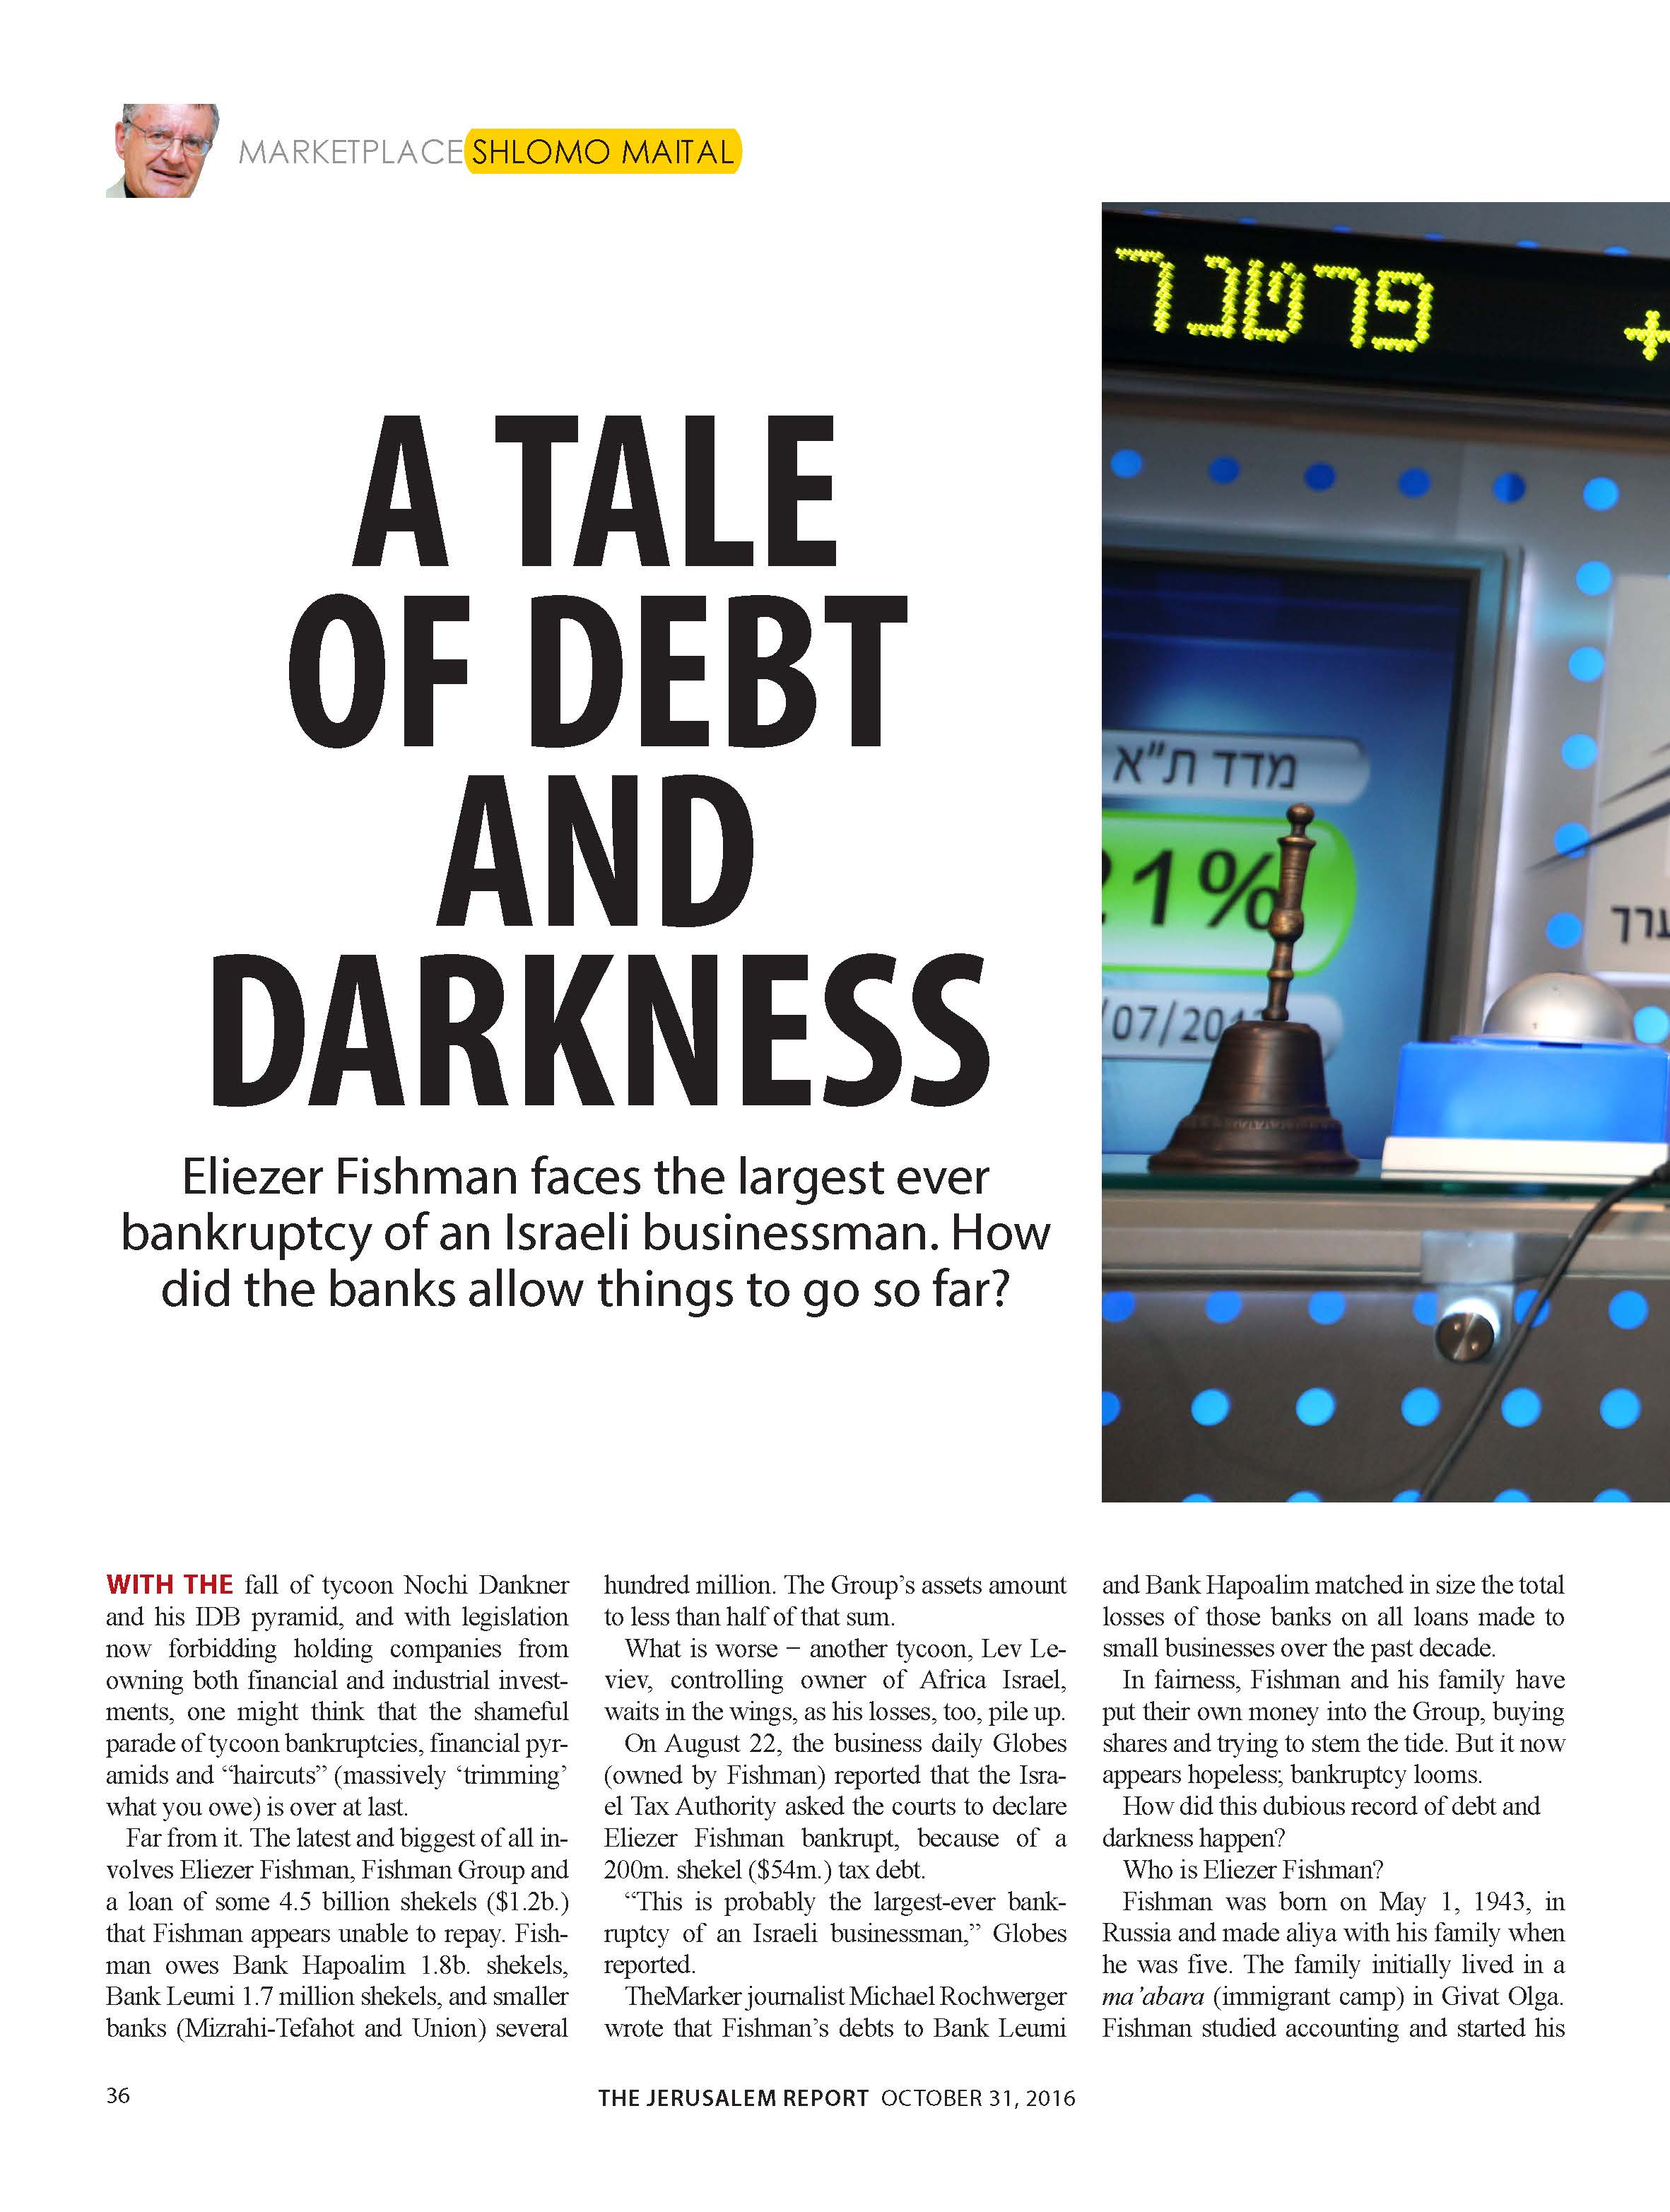 A Tale of debt and darkness